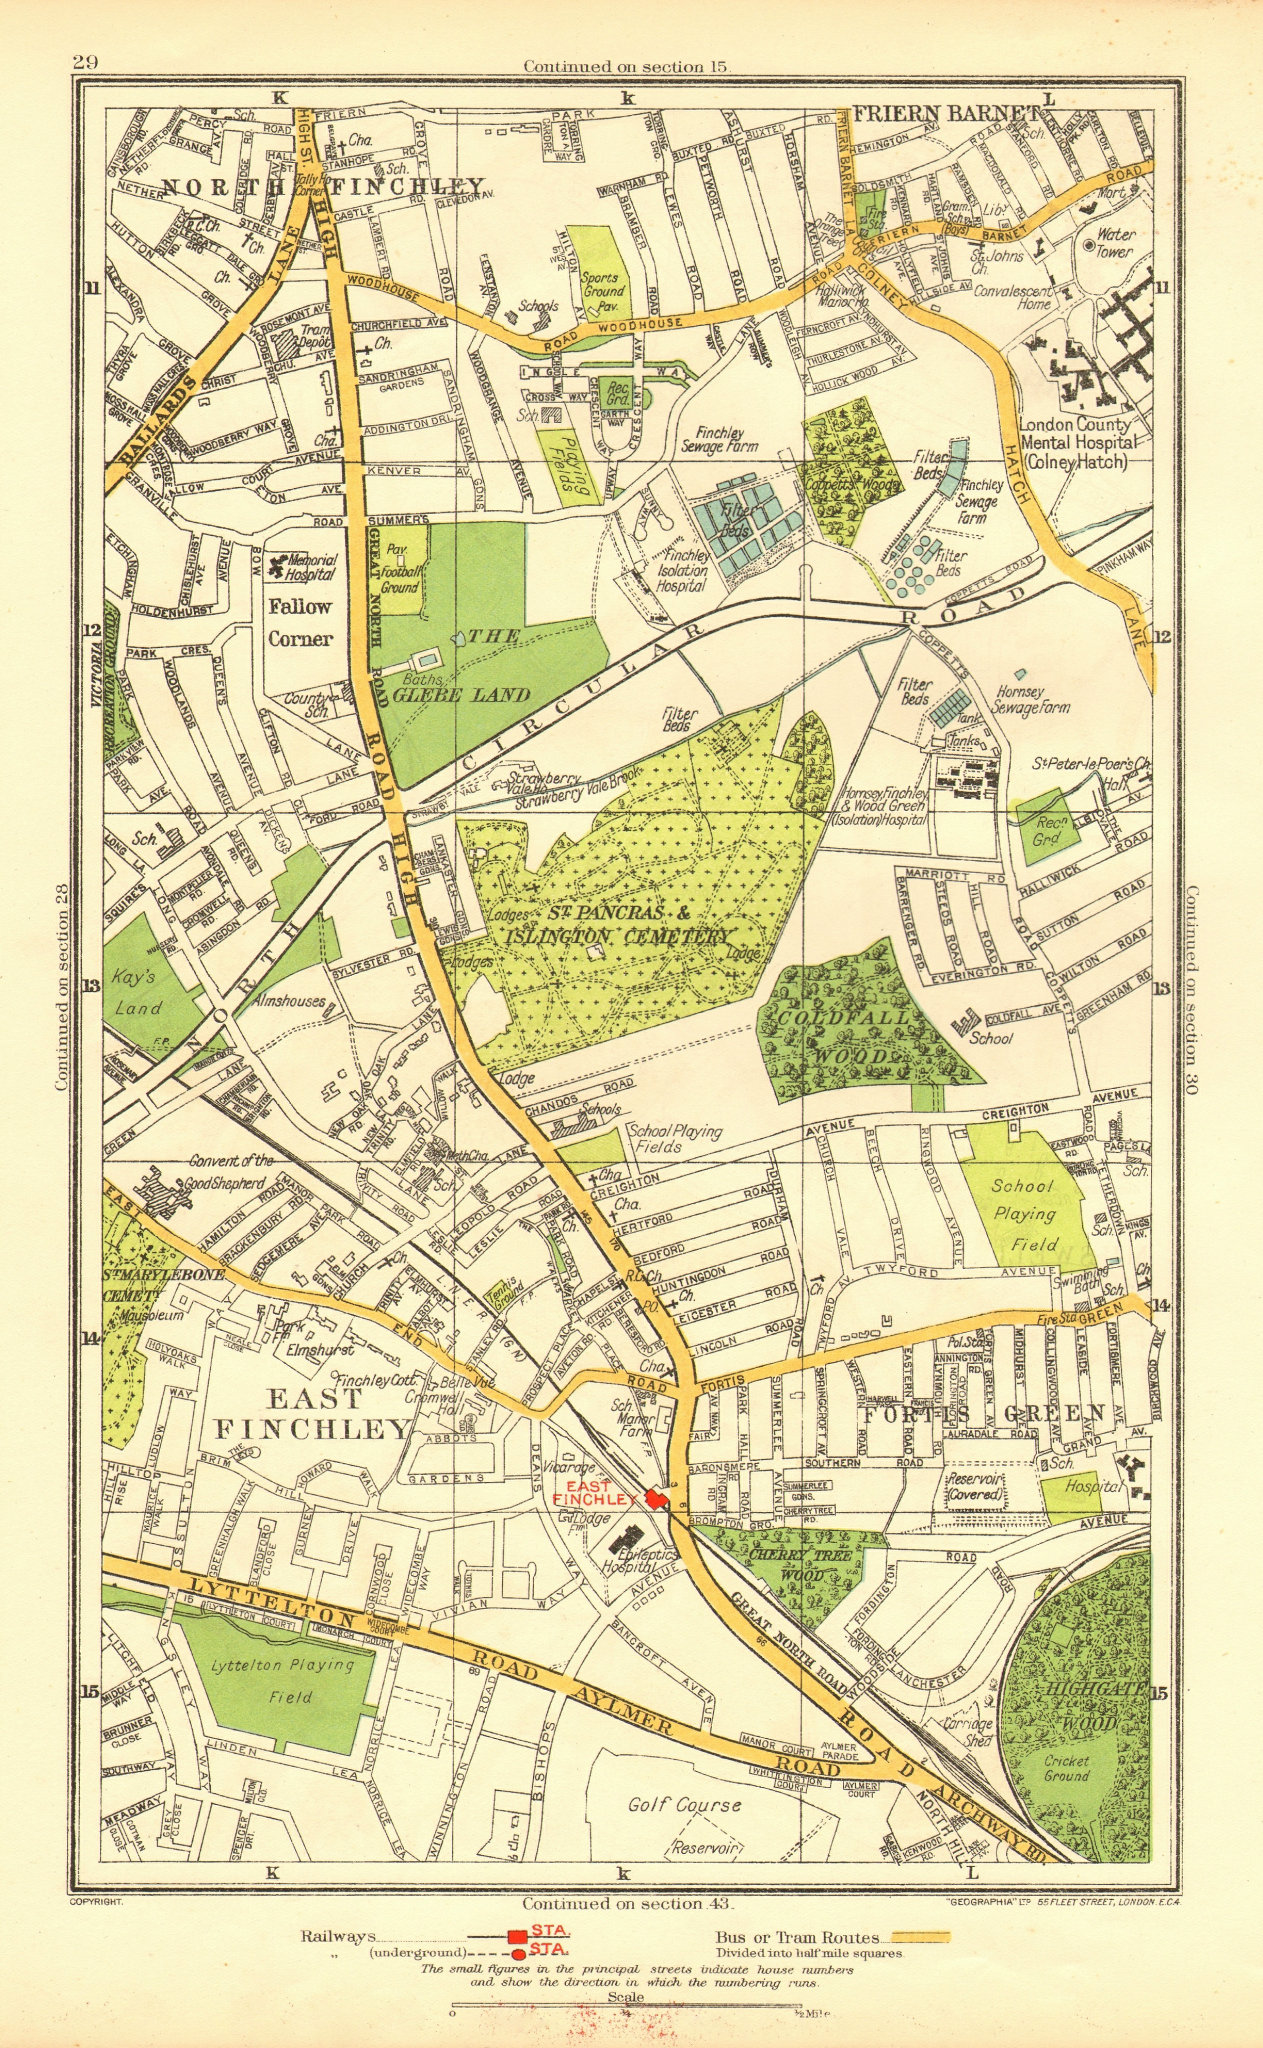 Associate Product FINCHLEY. Fortis Green Friern Barnet Muswell Hill Fallow Corner 1937 old map